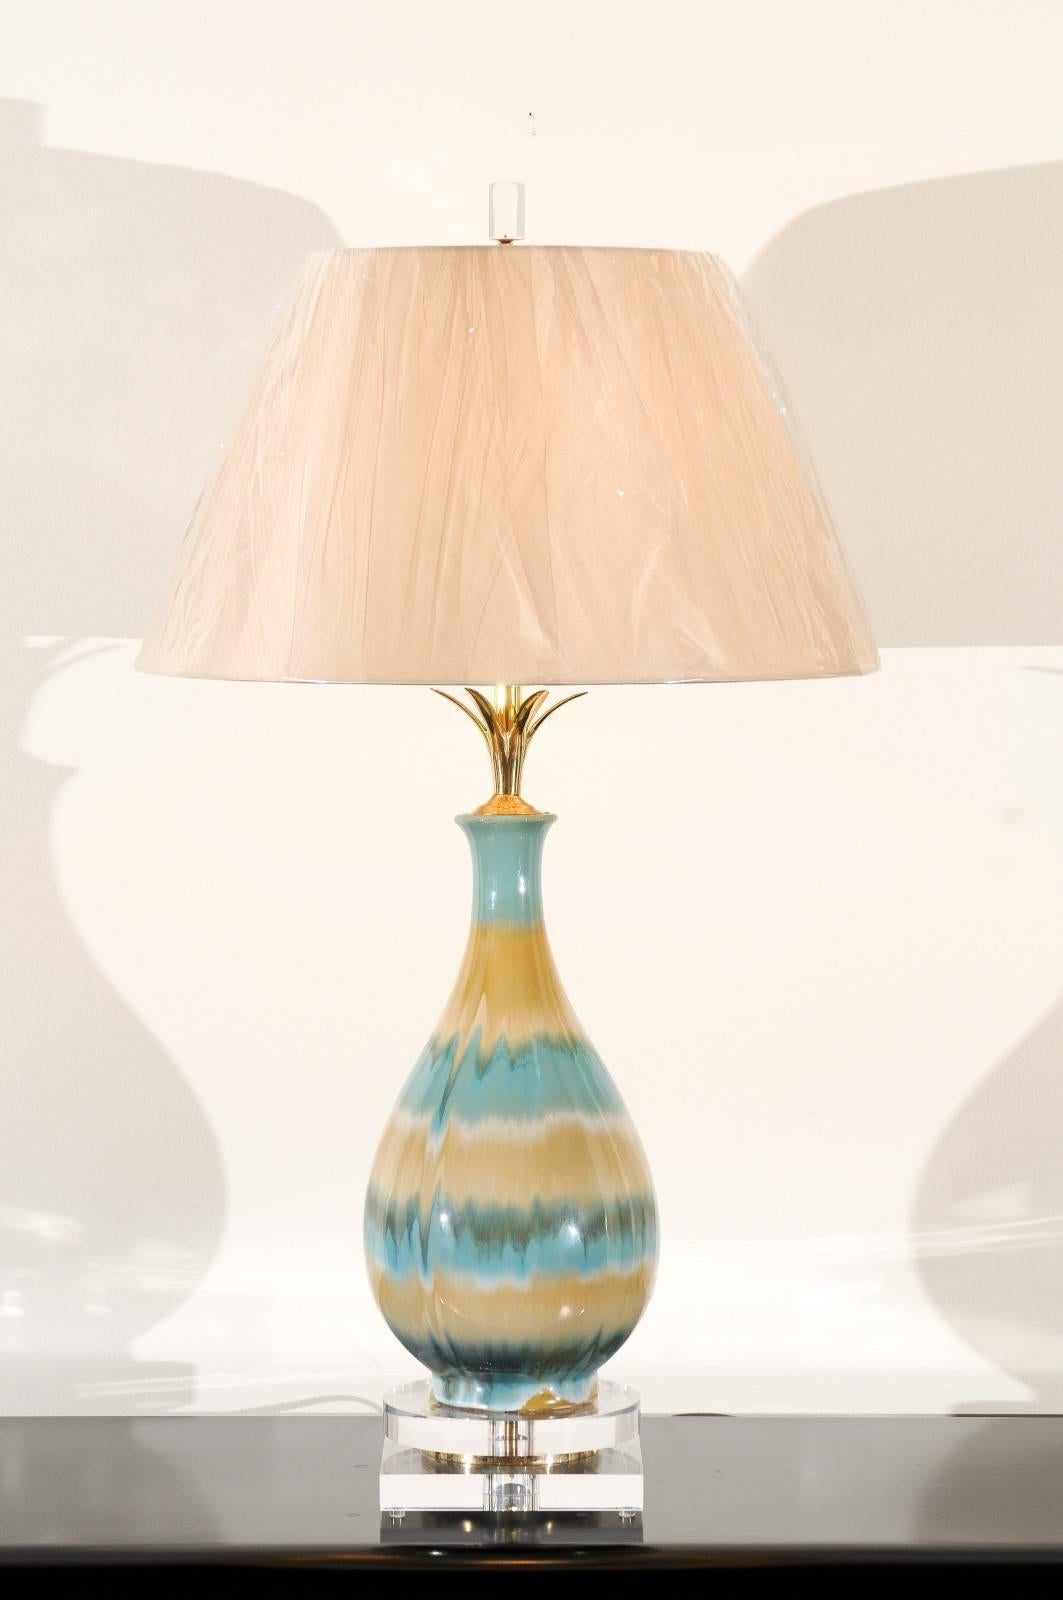 A stunning pair of drip glaze ceramic vessels as custom lamps. Fabulous scale, form and range of color. Lovely solid brass petal neck detail. Exceptional materials and craftsmanship. Exquisite jewelry! Excellent restored condition. Wired using clear